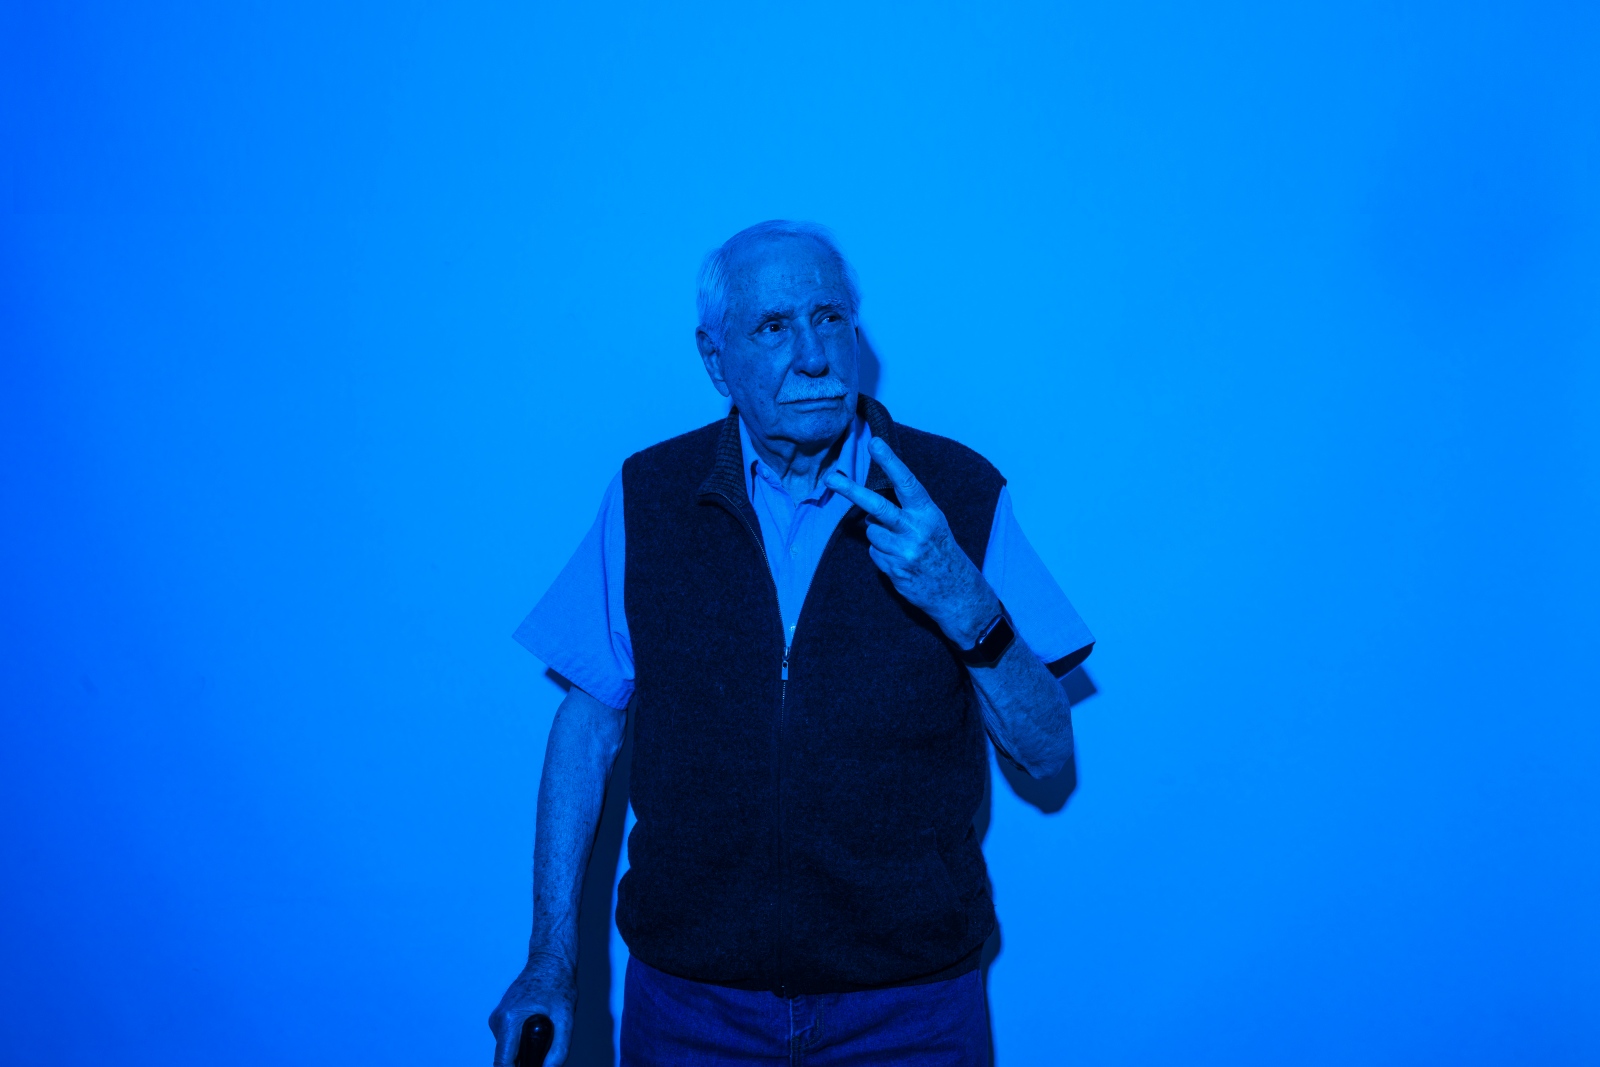 Mike Gravel 2020 Presidential Campaign Photoshoot